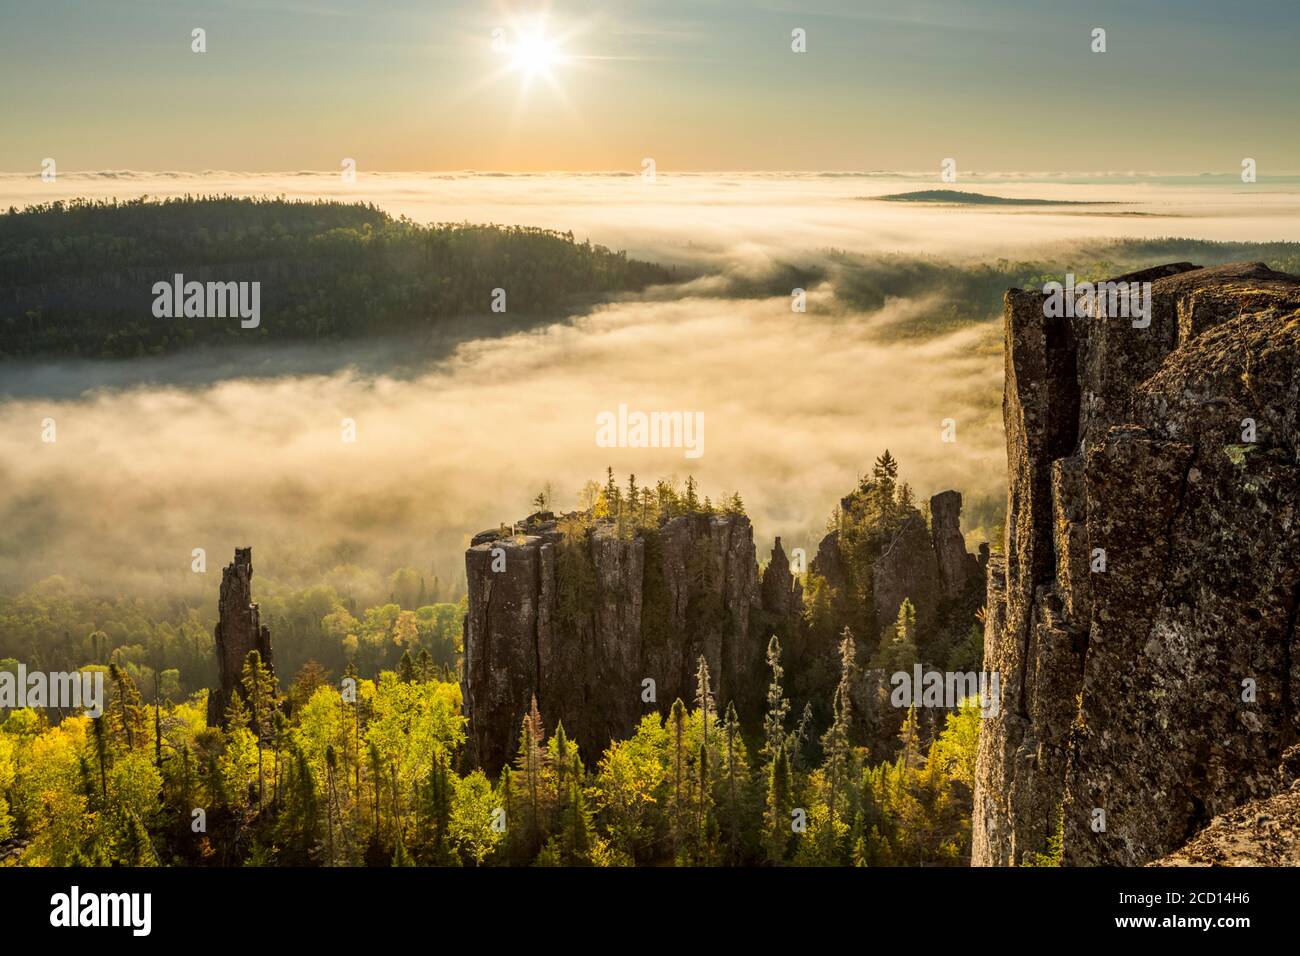 Sunrise over a misty, foggy valley in the Canadian Shield; Dorian, Ontario, Canada Stock Photo